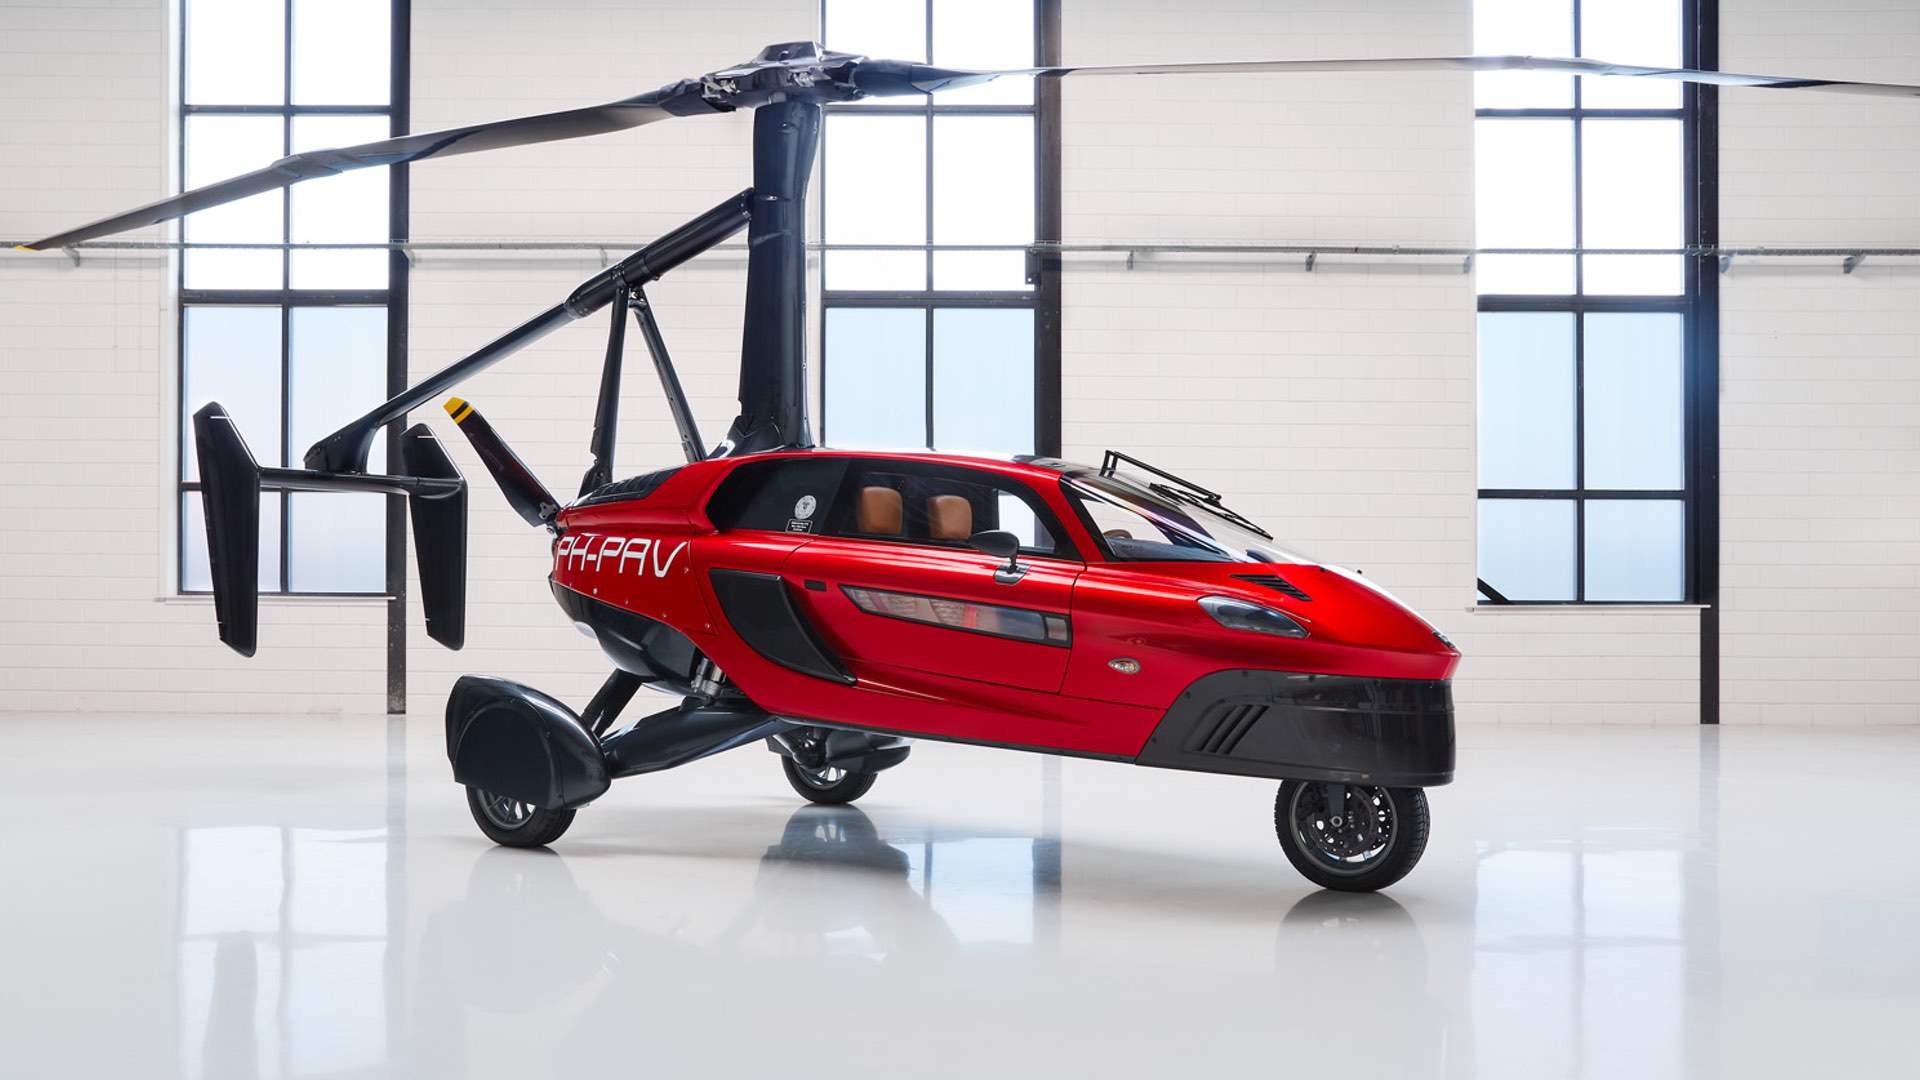 Flying Cars Are a Thing You Can Buy Now